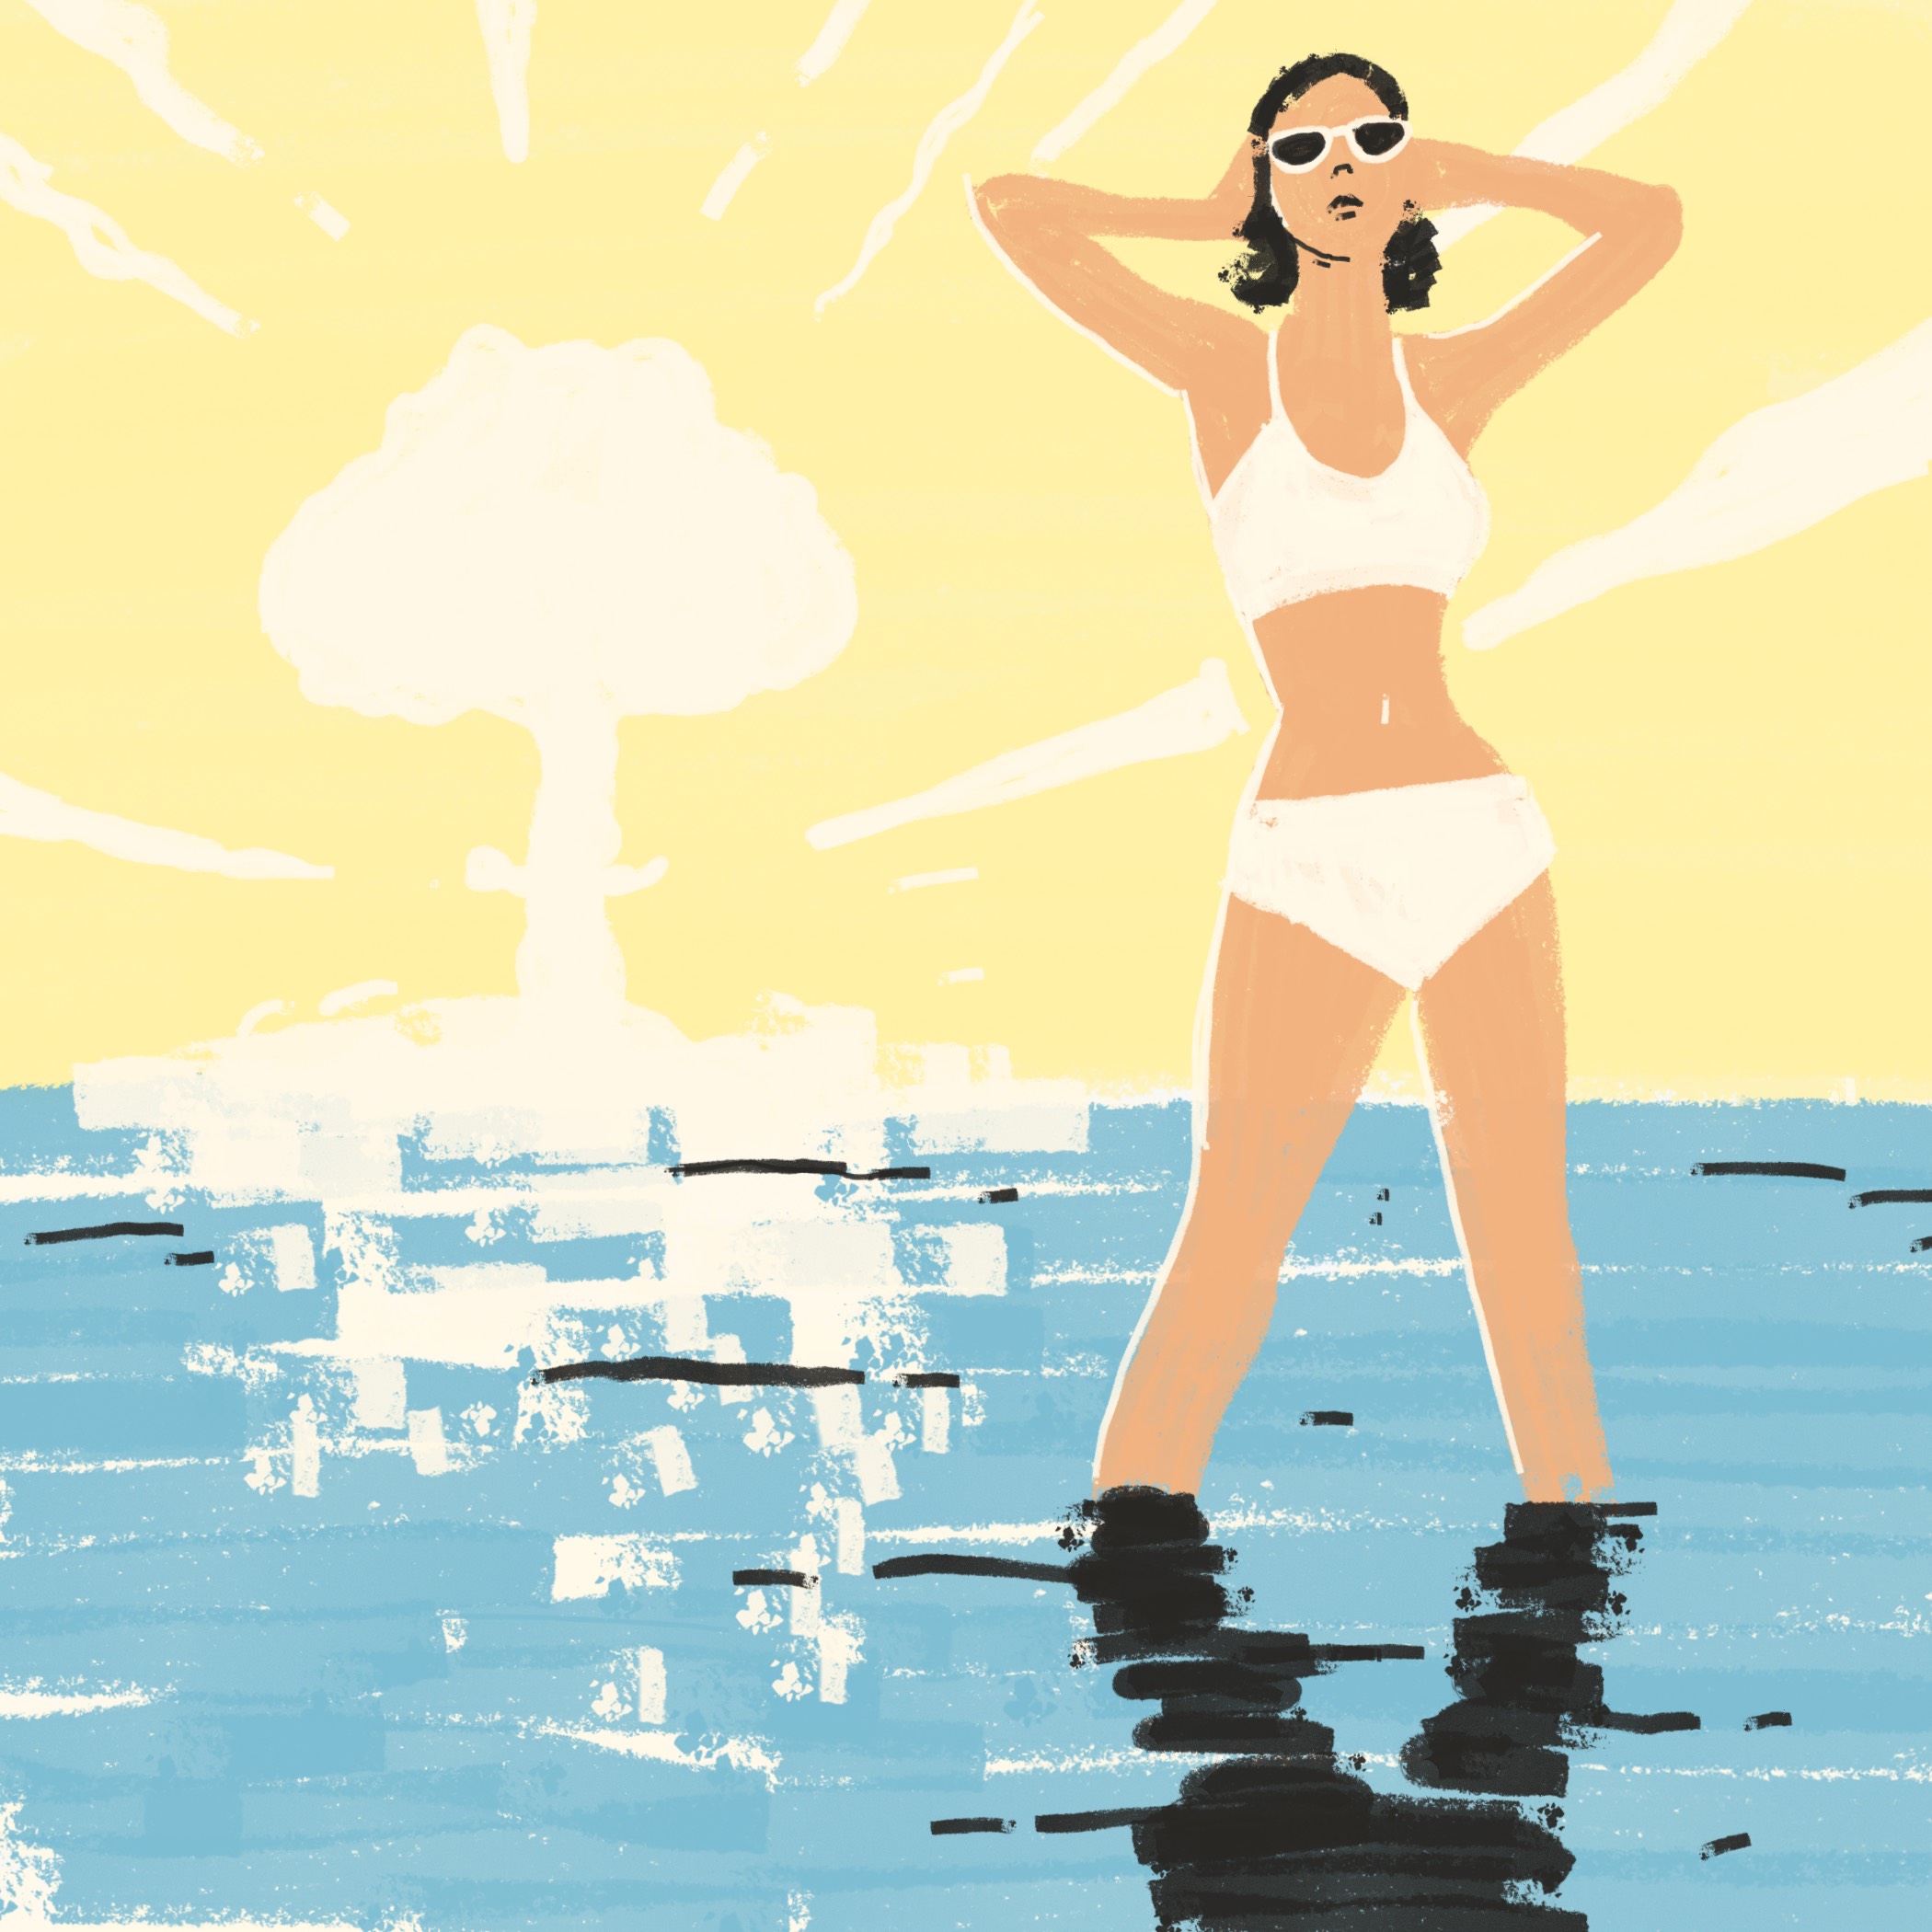 World War II, liberation and the bikini: The history of the bikini and how  its creation relates to our world today